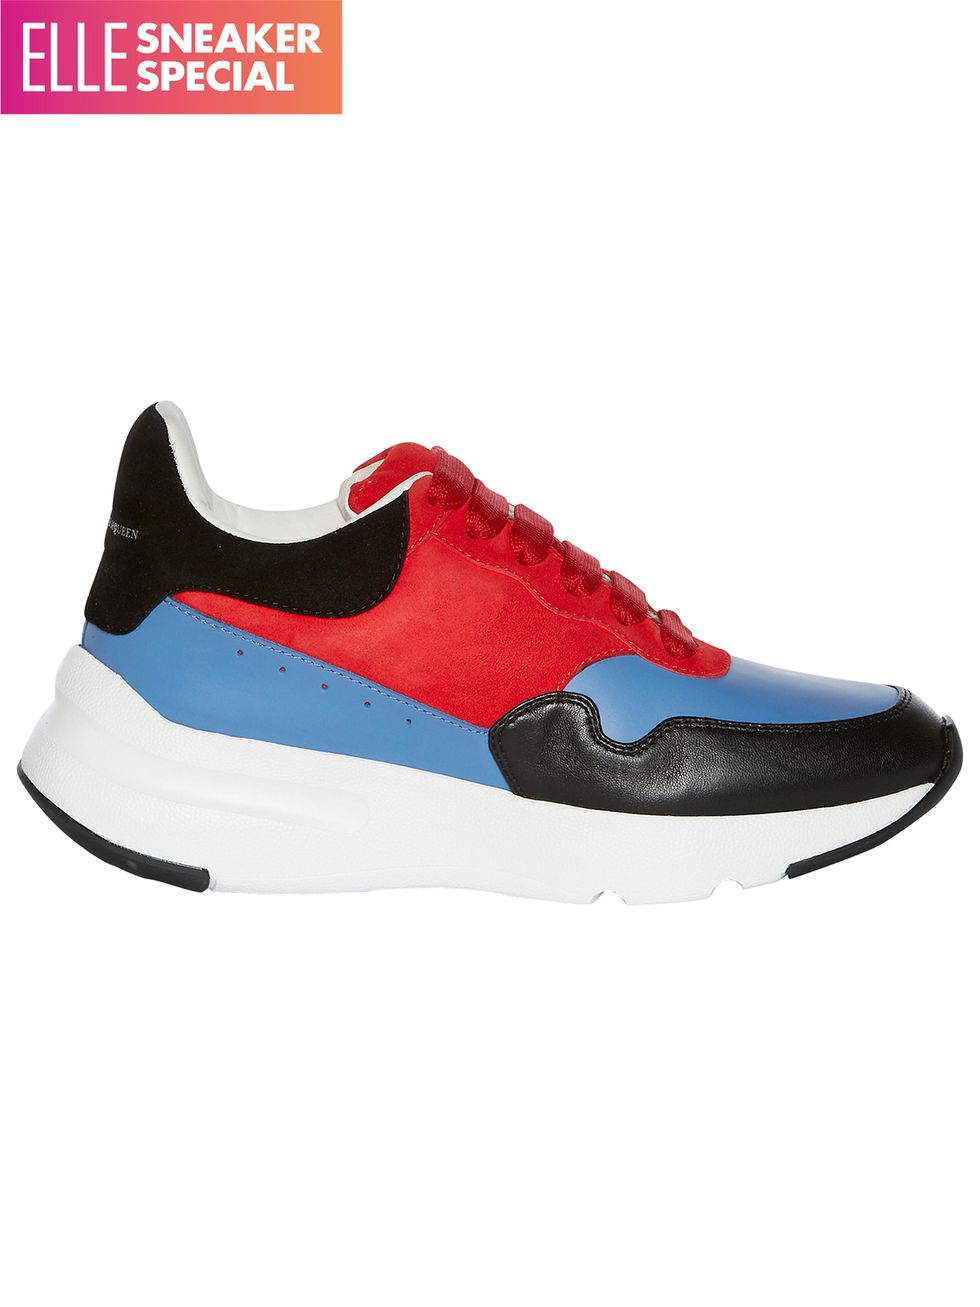 Footwear, Blue, Product, Shoe, White, Red, Logo, Carmine, Electric blue, Sneakers, 